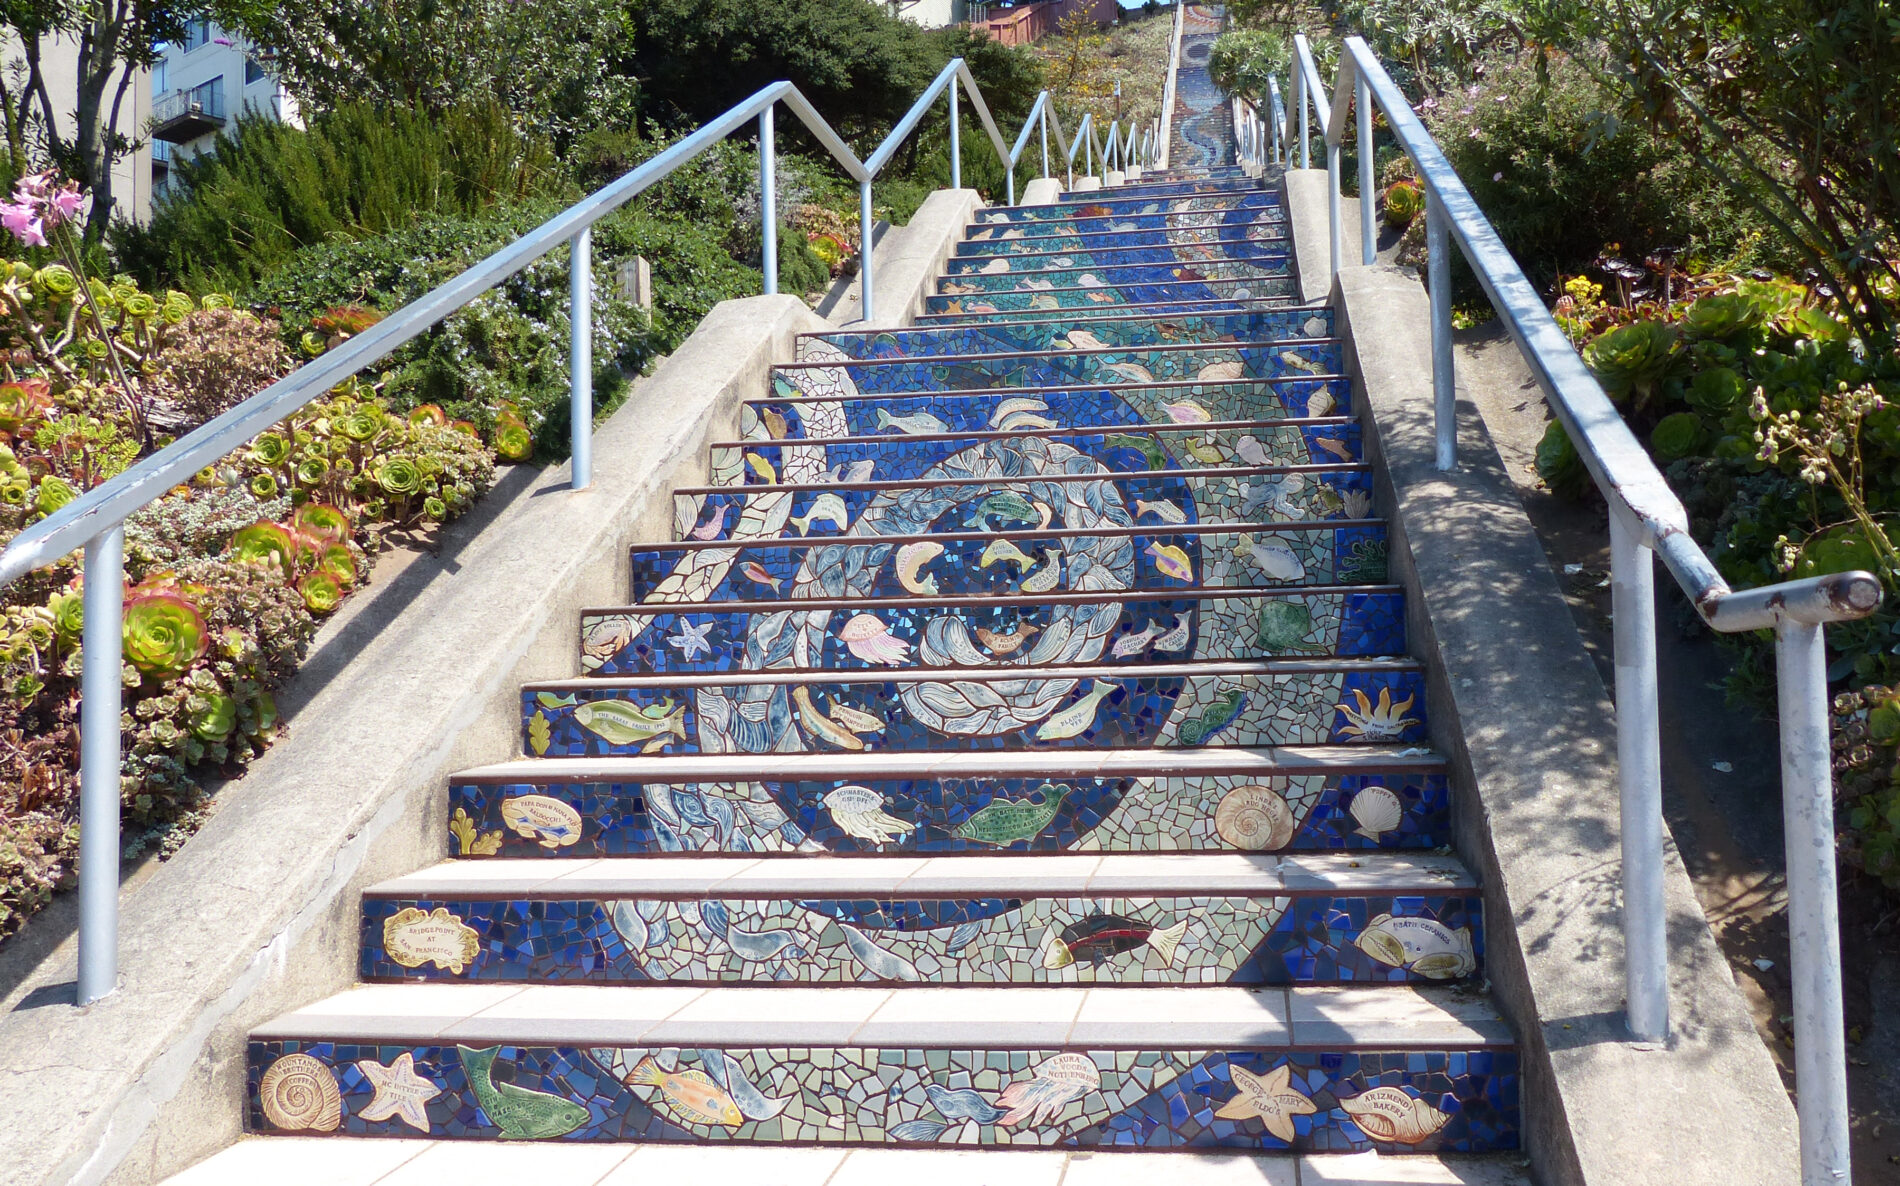 A closeup view of the ocean scene with sea creatures in the mosaic tiles on Moraga Steps in San Francisco.